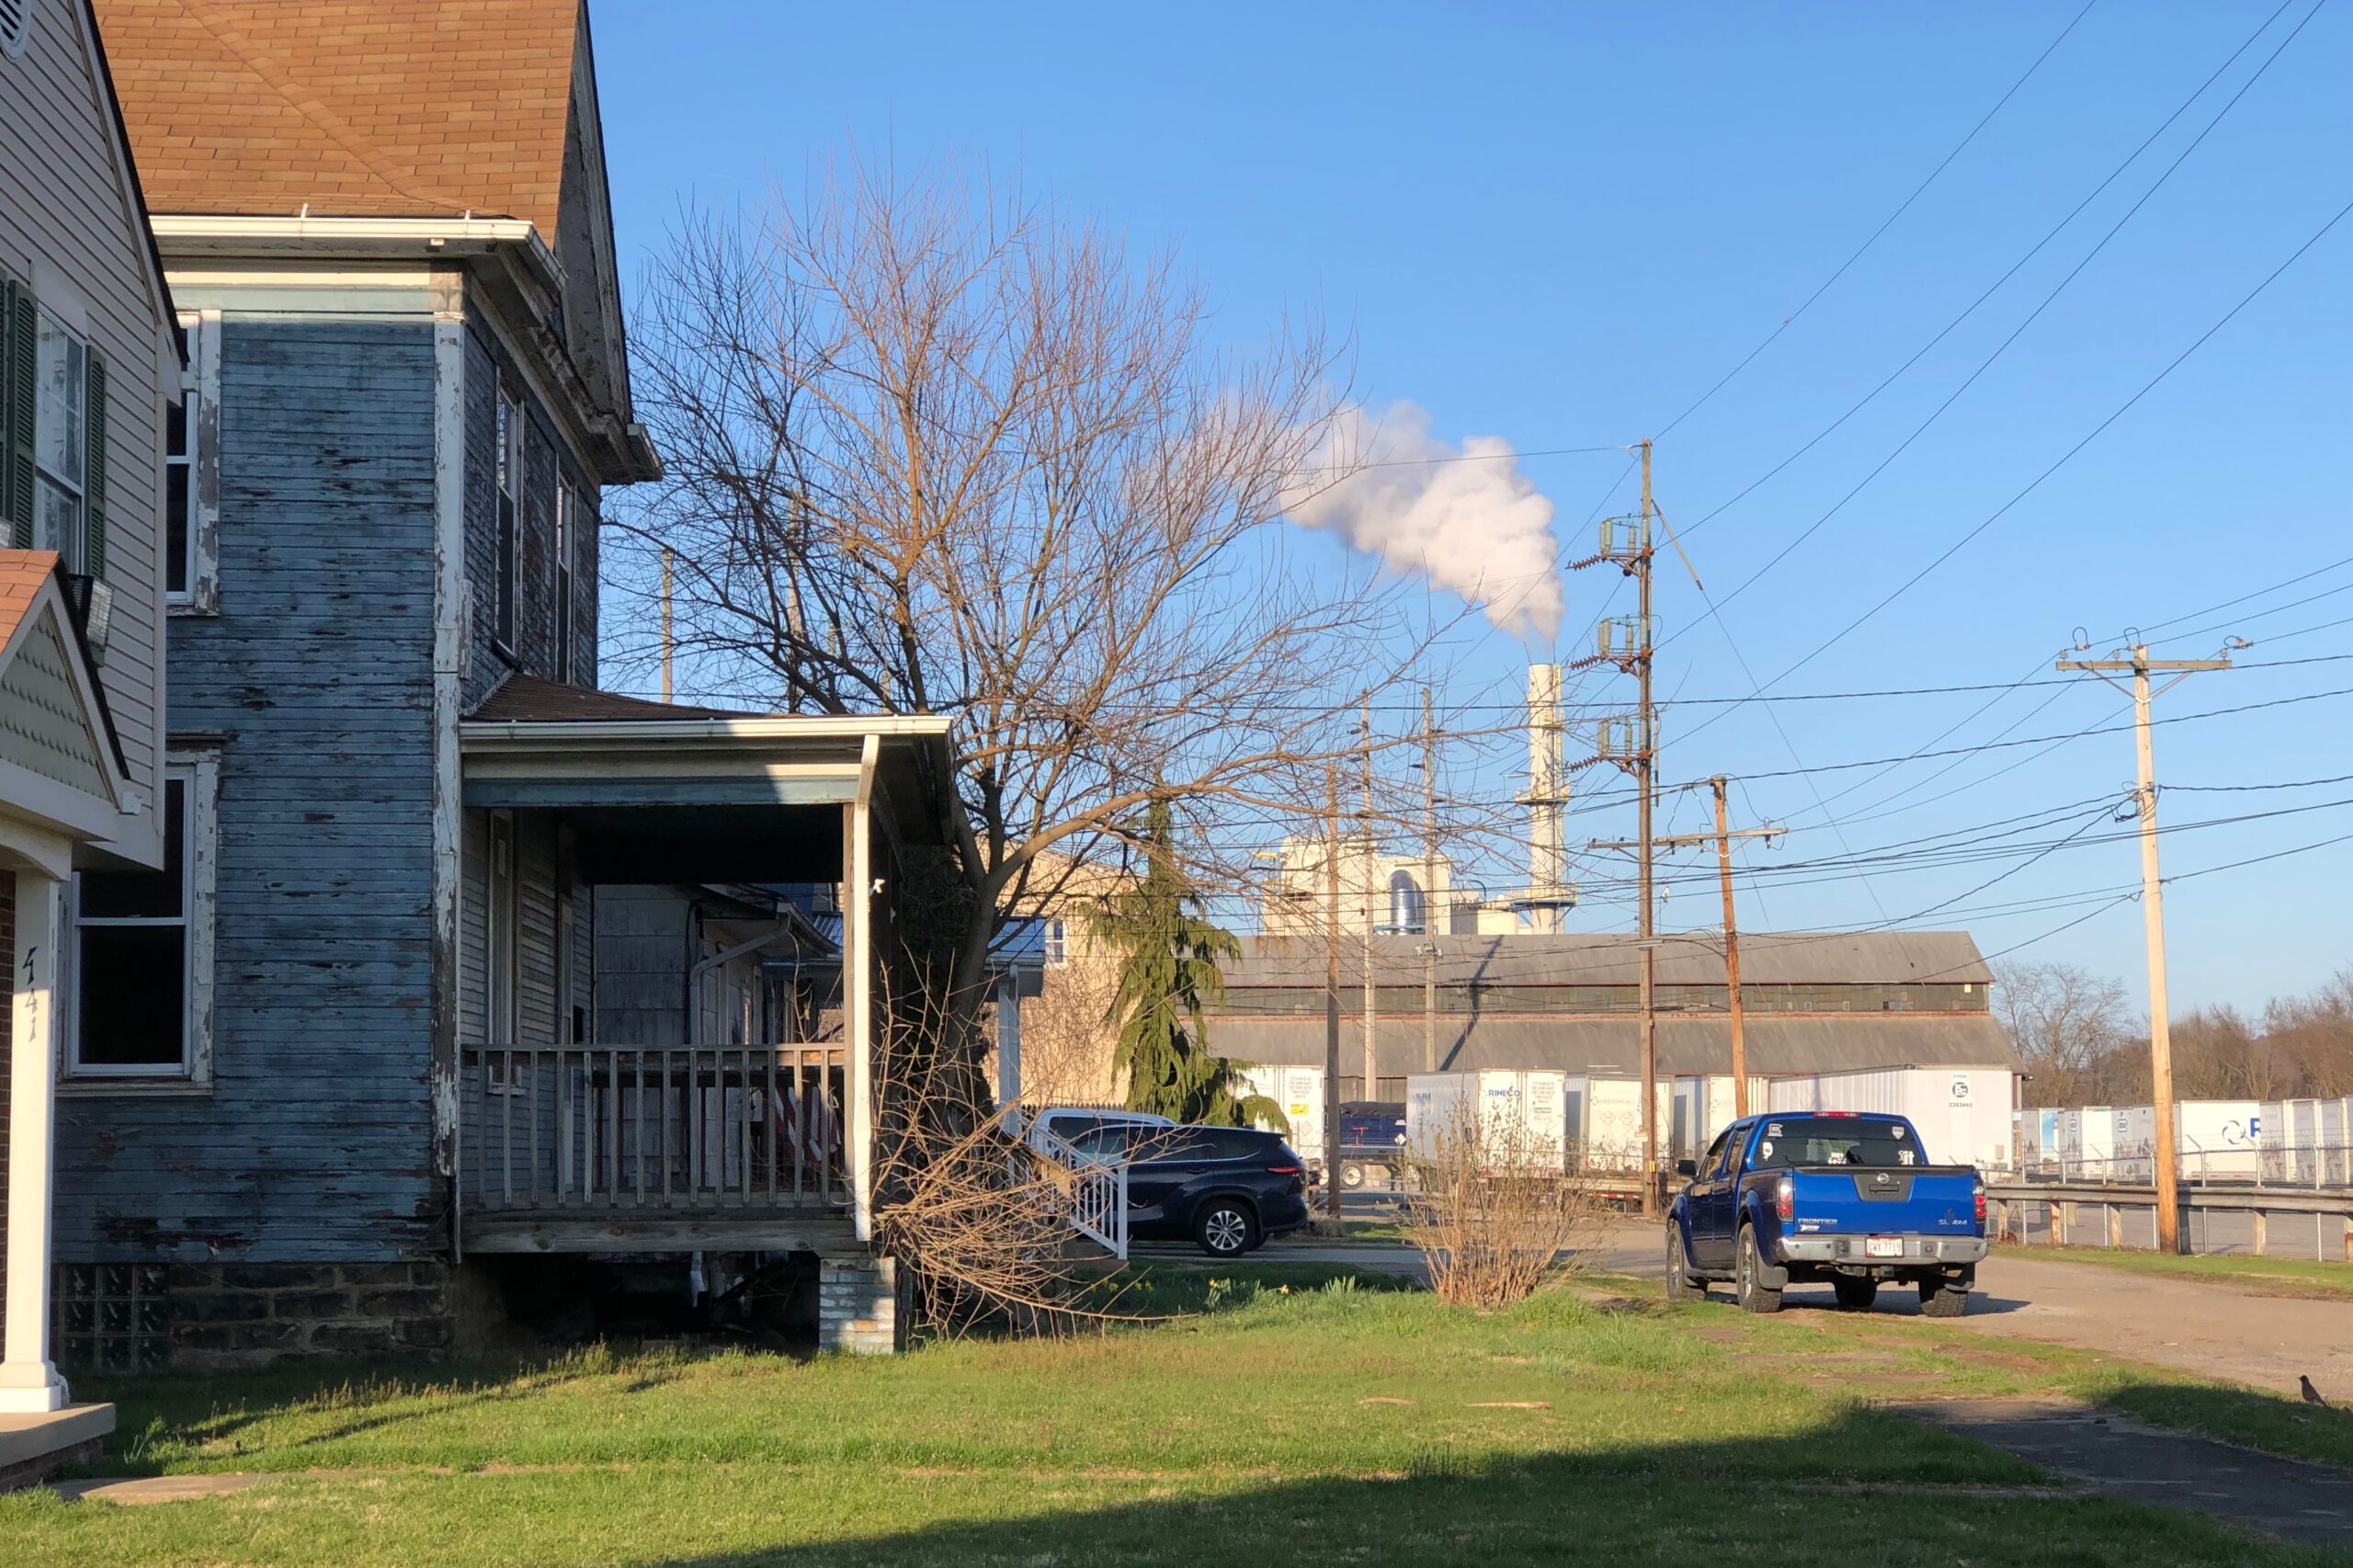 Homes along a street with a smokestack in the background